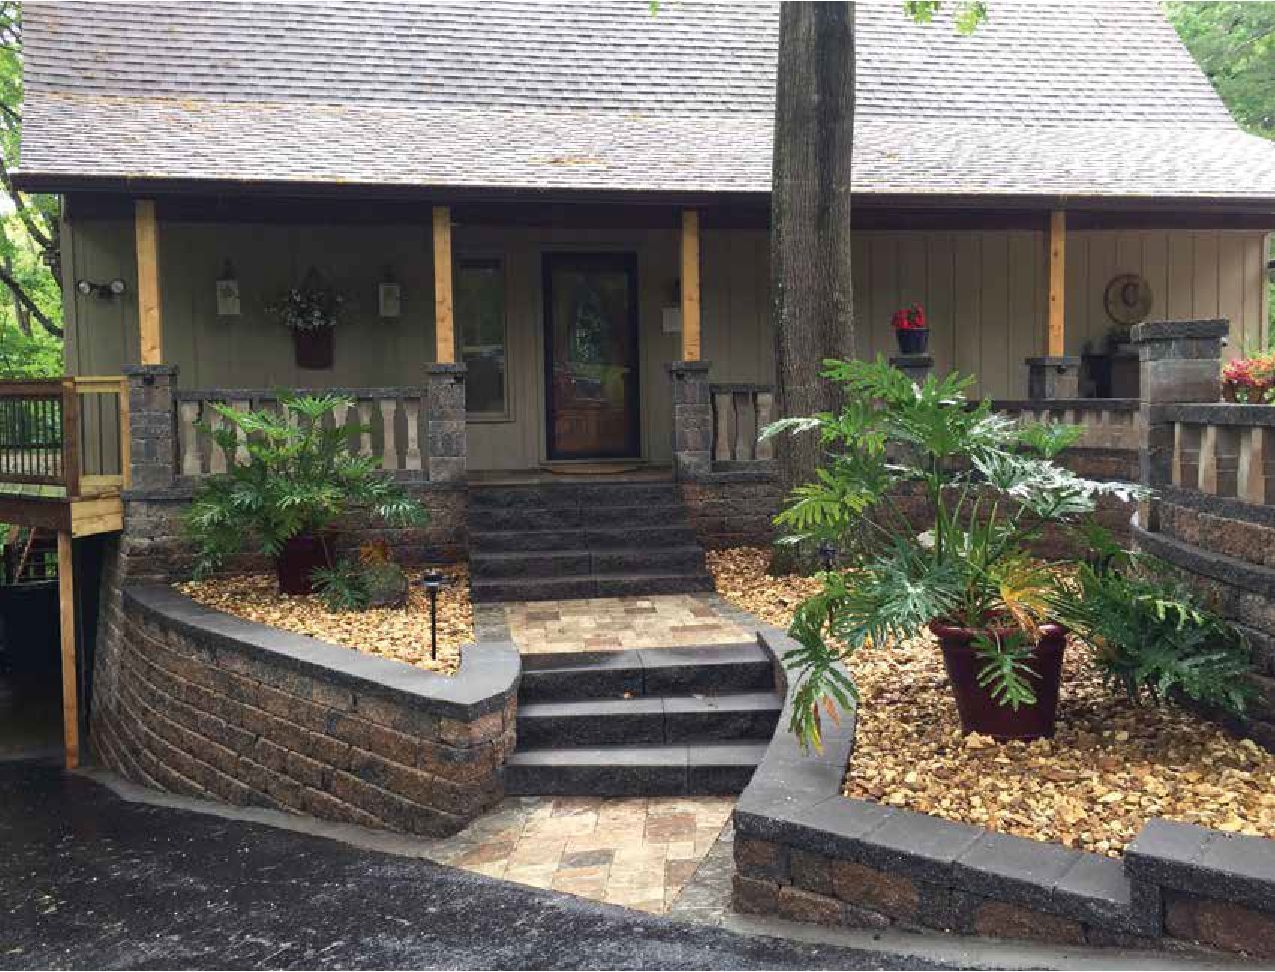 Transform Your Home’s Exterior When You Build Your Patio in Phases. Stockman Stoneworks Can Help.